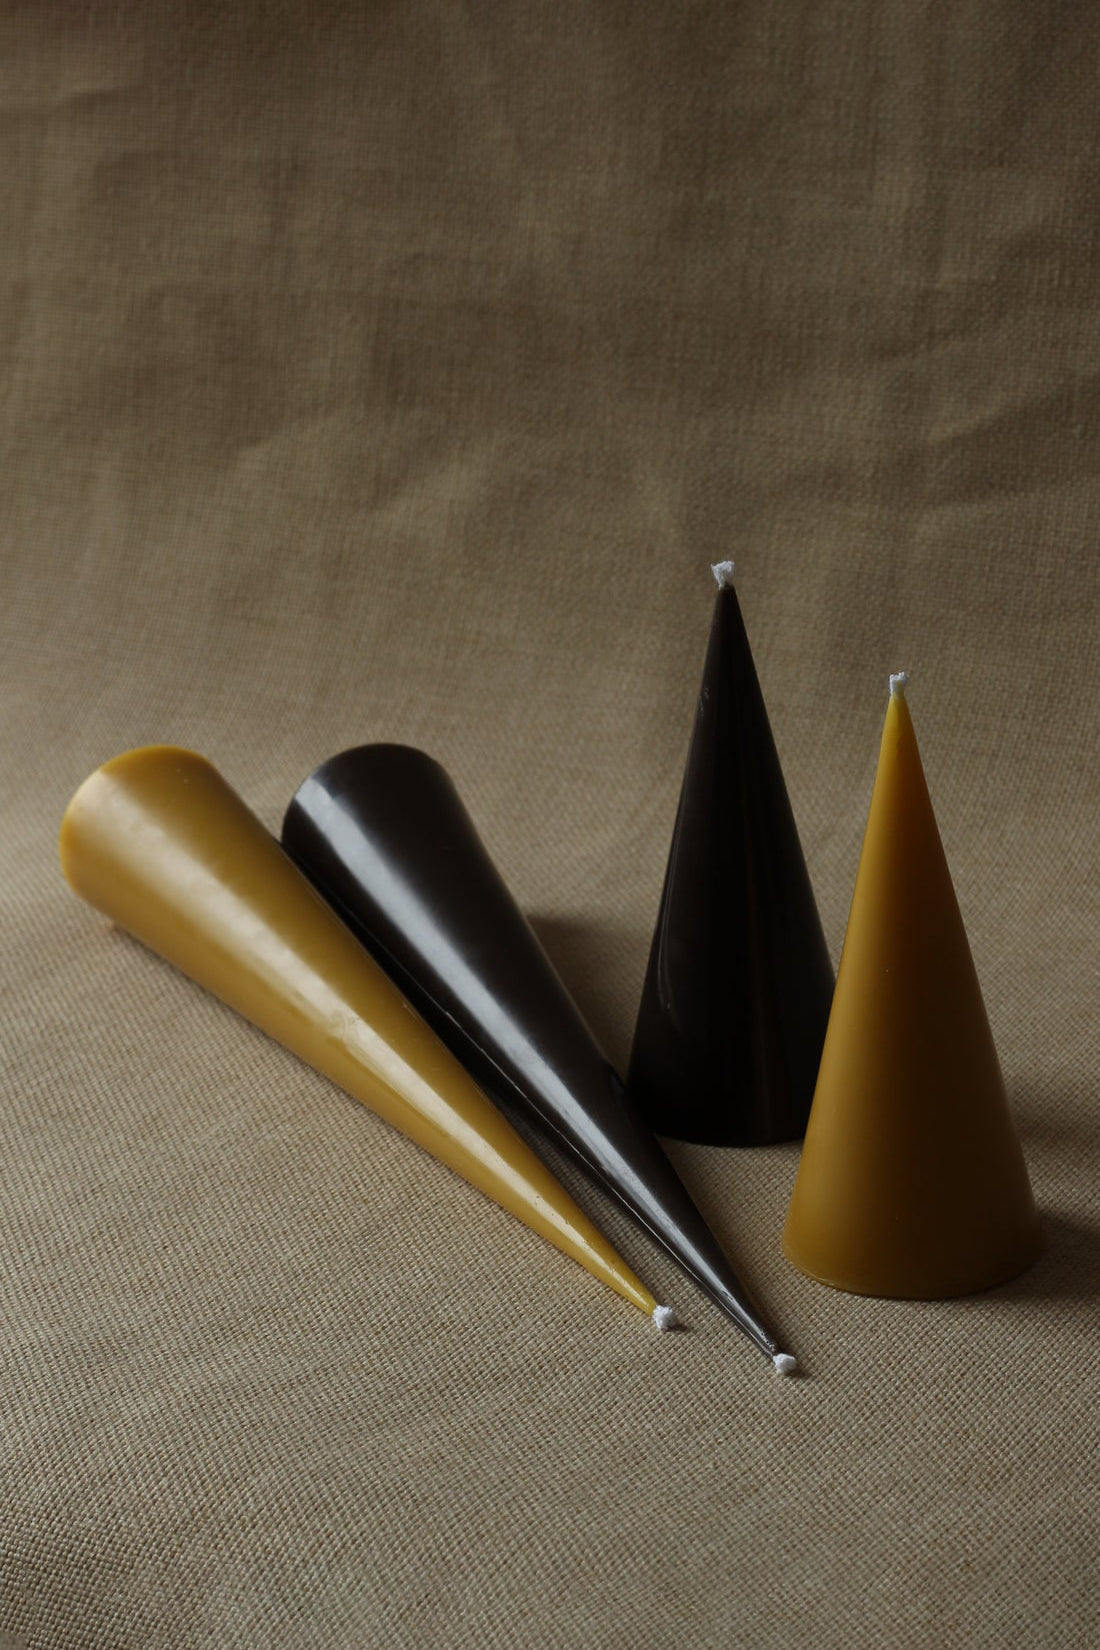 The Double Cone Set